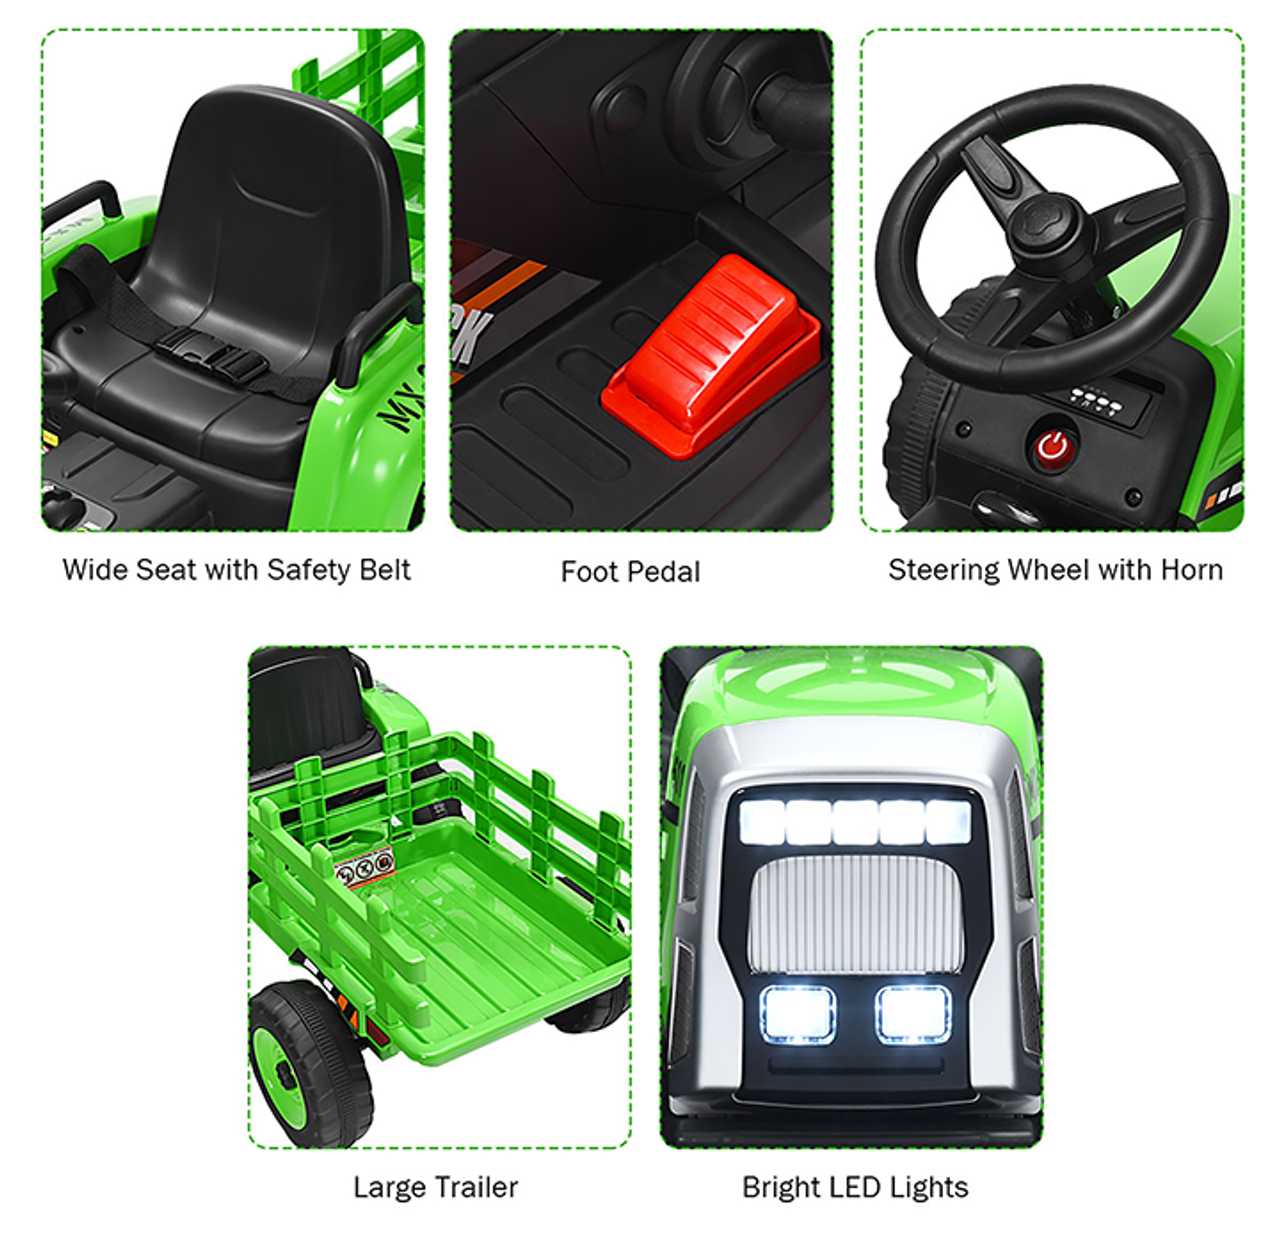 Kids' 12V Ride On/Remote Control Tractor with Trailer product image